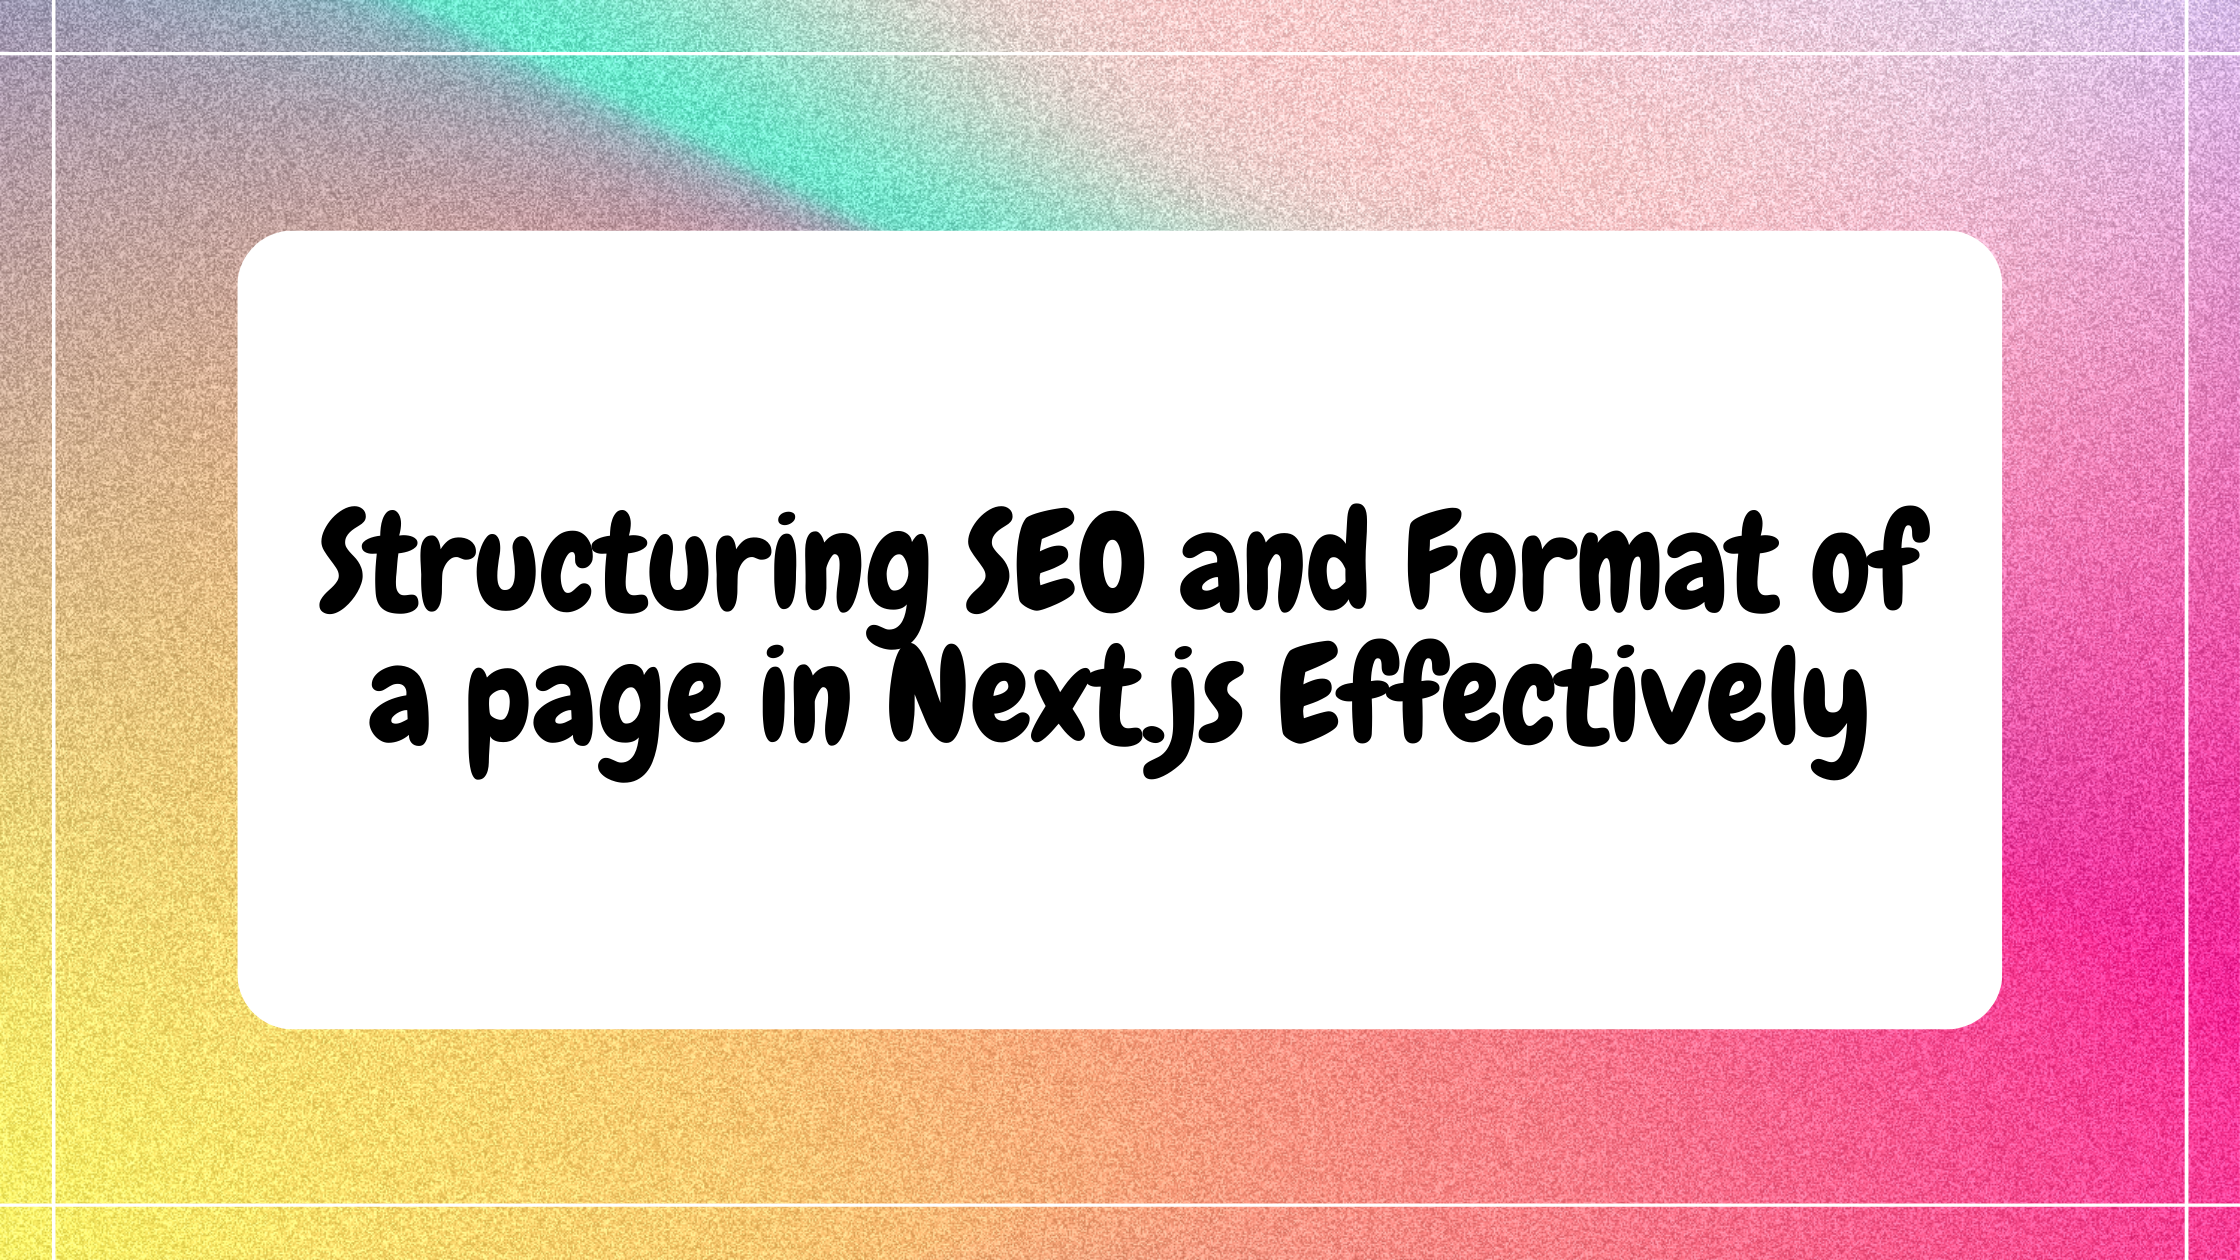 Structuring SEO and Format of a page in Next.js Effectively